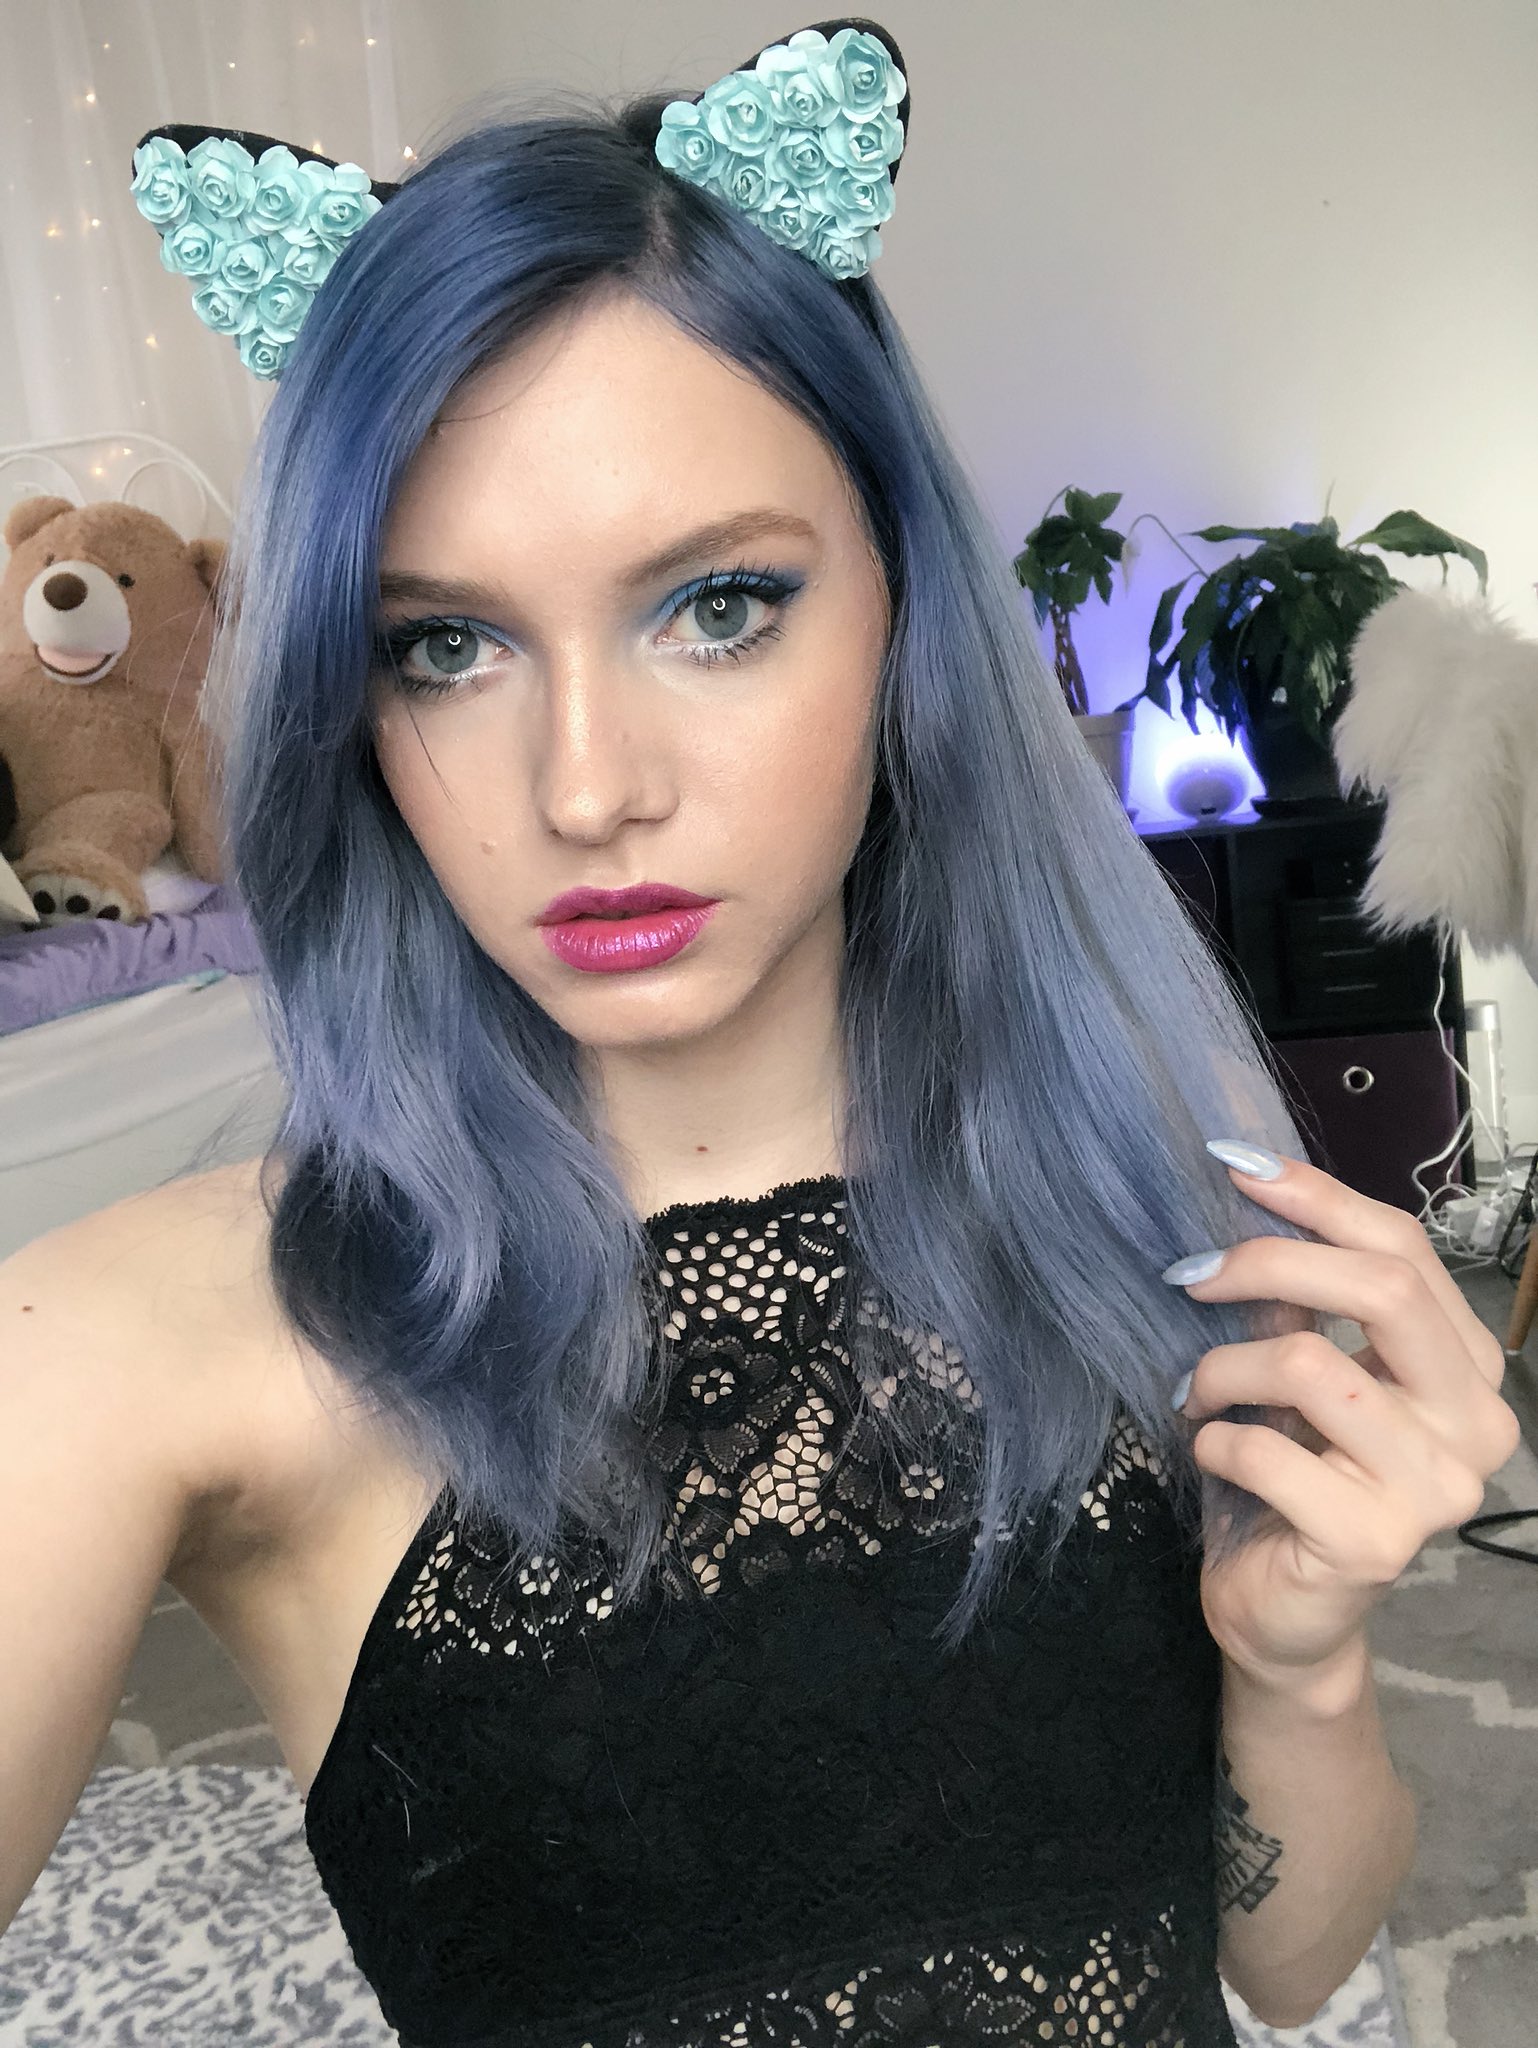 Thenovastorm Chaturbate Cam Girl Sexy Now Nude Teens